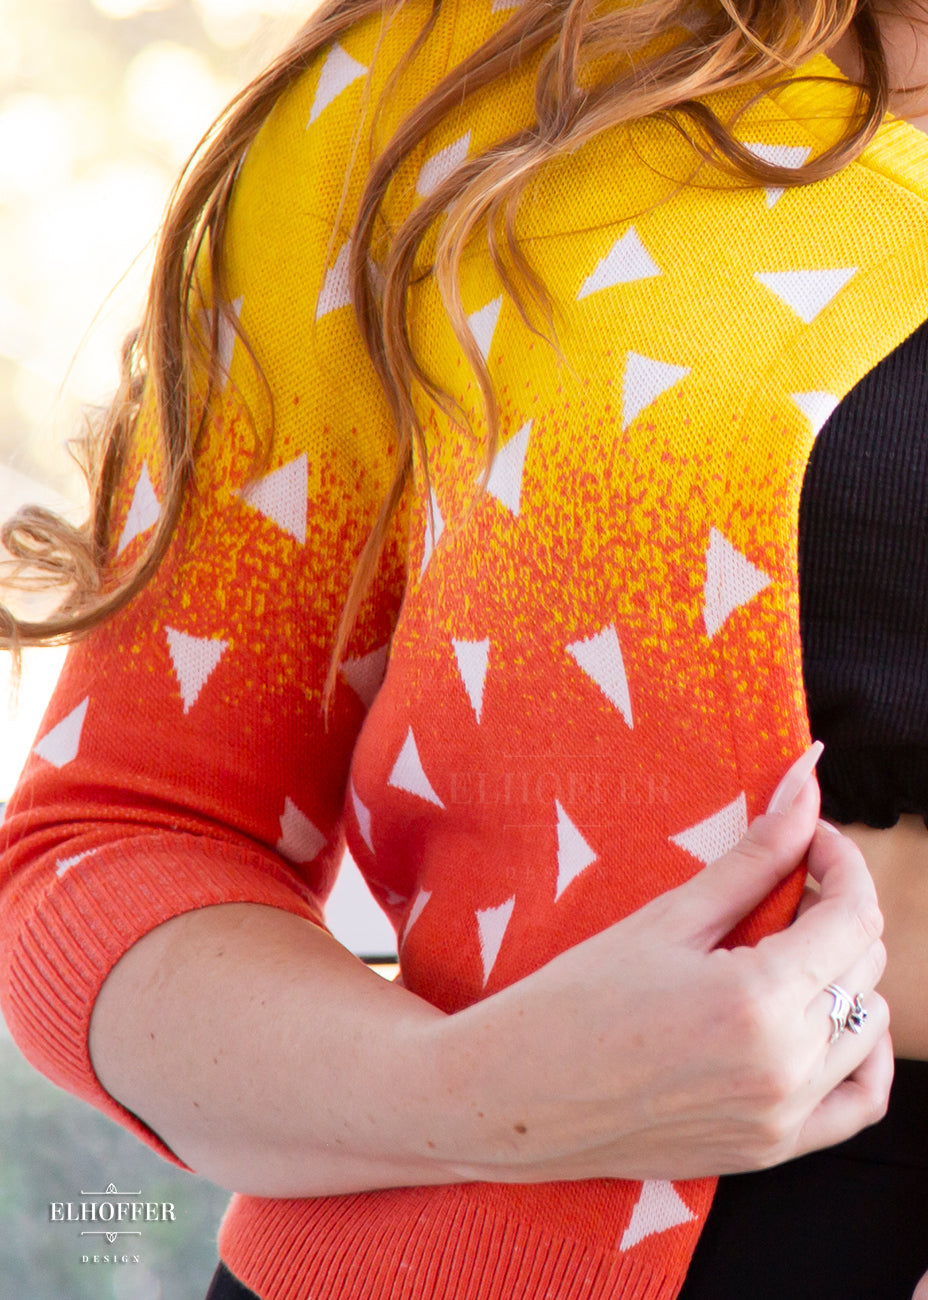 A close up of the yellow to orange gradient knit pattern with white triangles throughout.